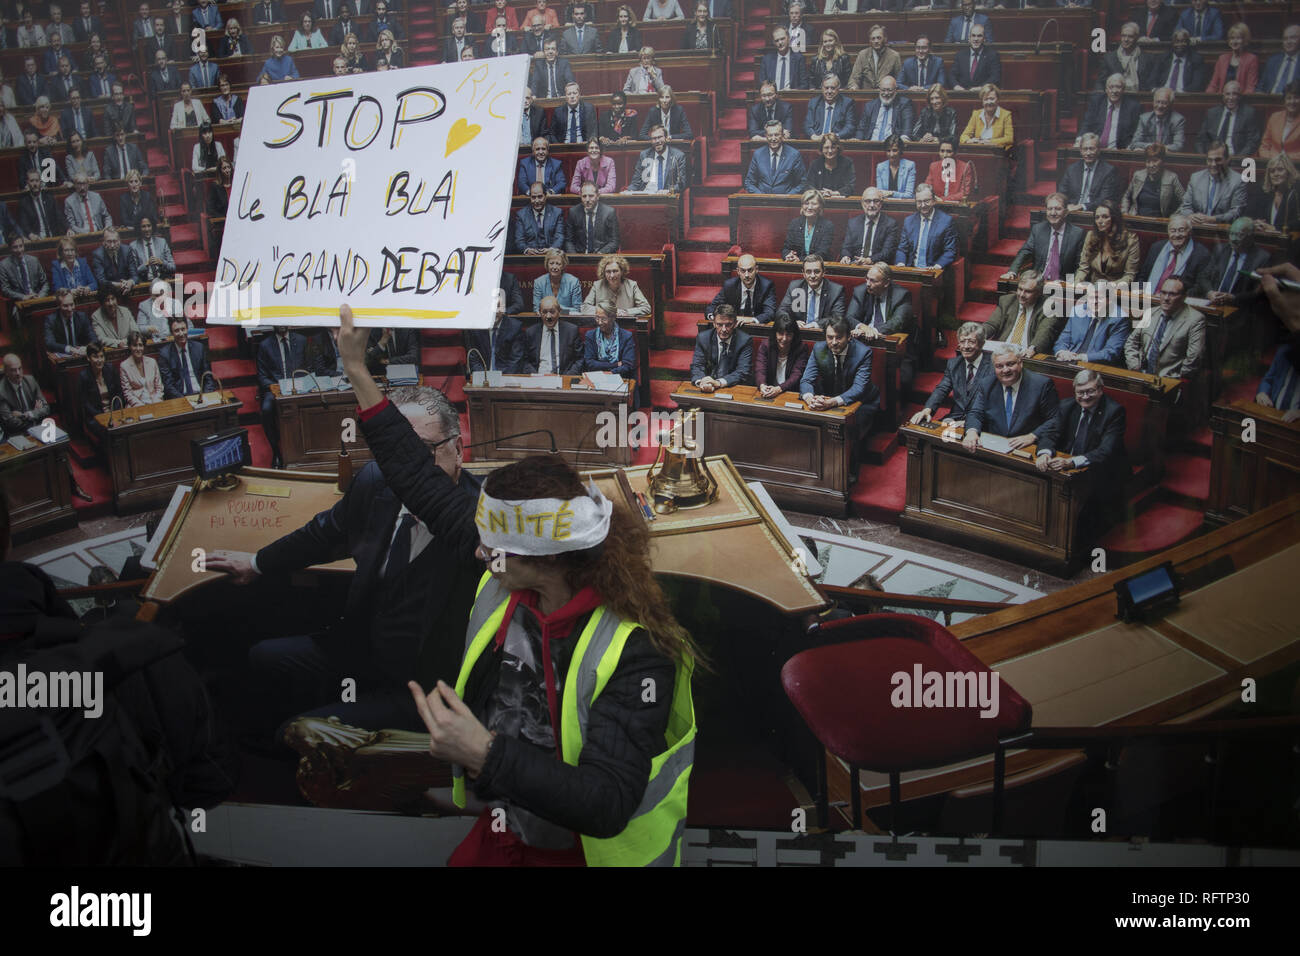 Paris, Ile de France, France. 26th Jan, 2019. A protestor stands in front of an image of the parliament while holding a placard during a demonstration against macron policies. Yellow vest protestors gathered and march on the streets of Paris another Saturday on what they call the Act XI against the French president Emmanuel Macron policies. Credit: Bruno Thevenin/SOPA Images/ZUMA Wire/Alamy Live News Stock Photo